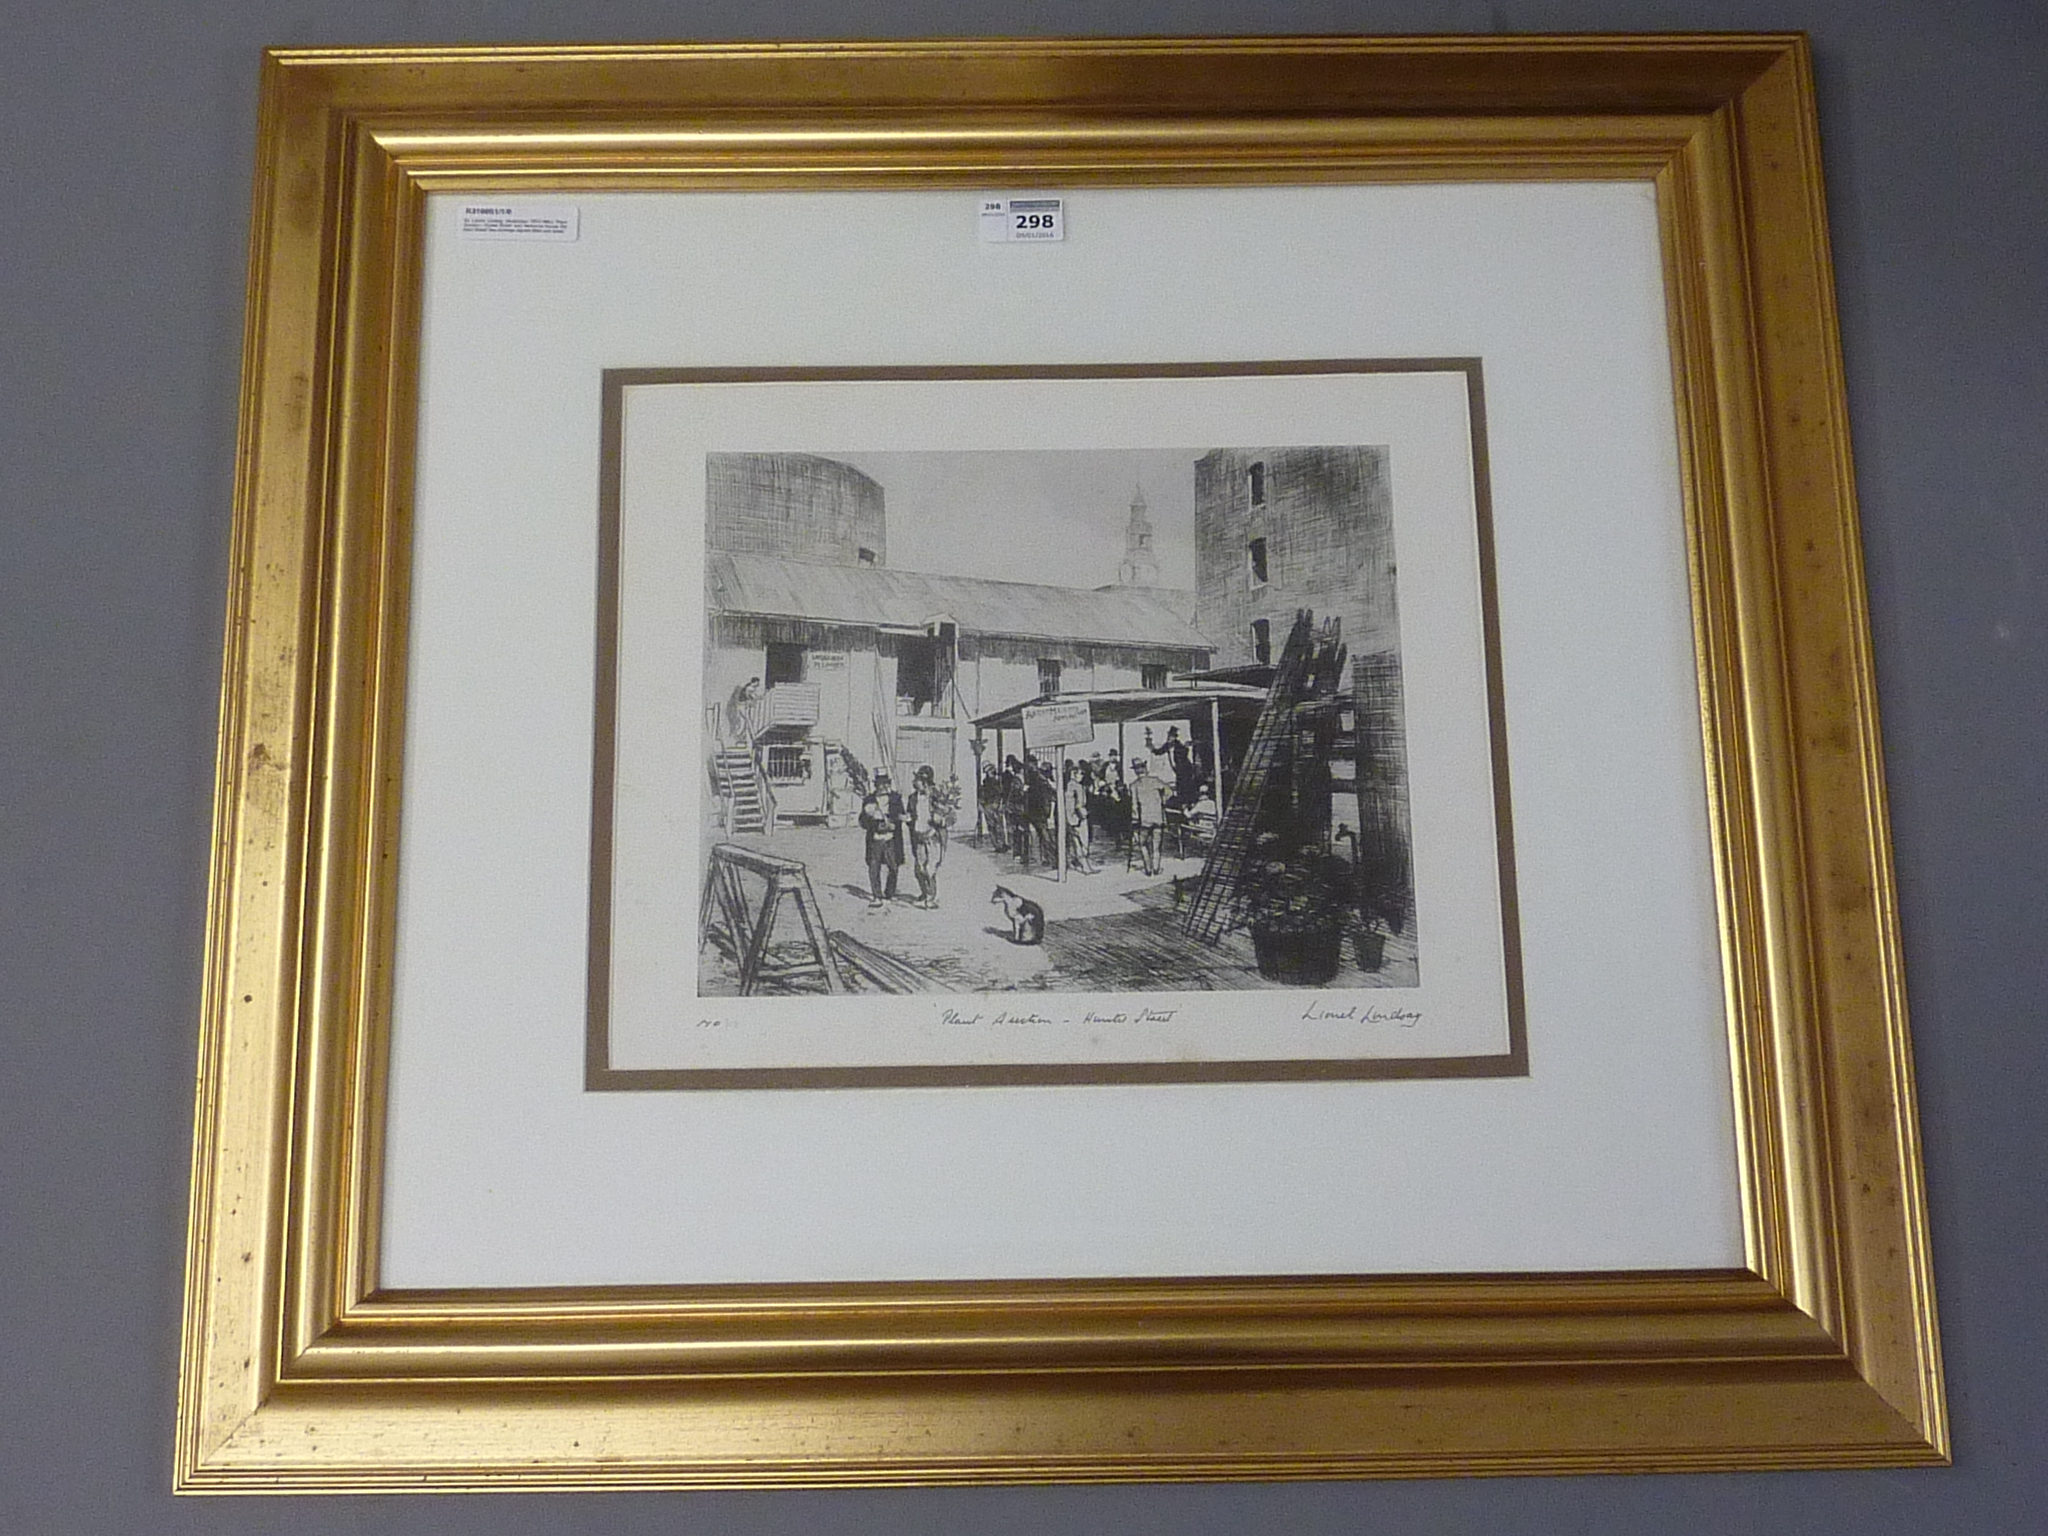 'Plant Auction - Hunter Street' and 'Ashmore House Old Hunt Street',